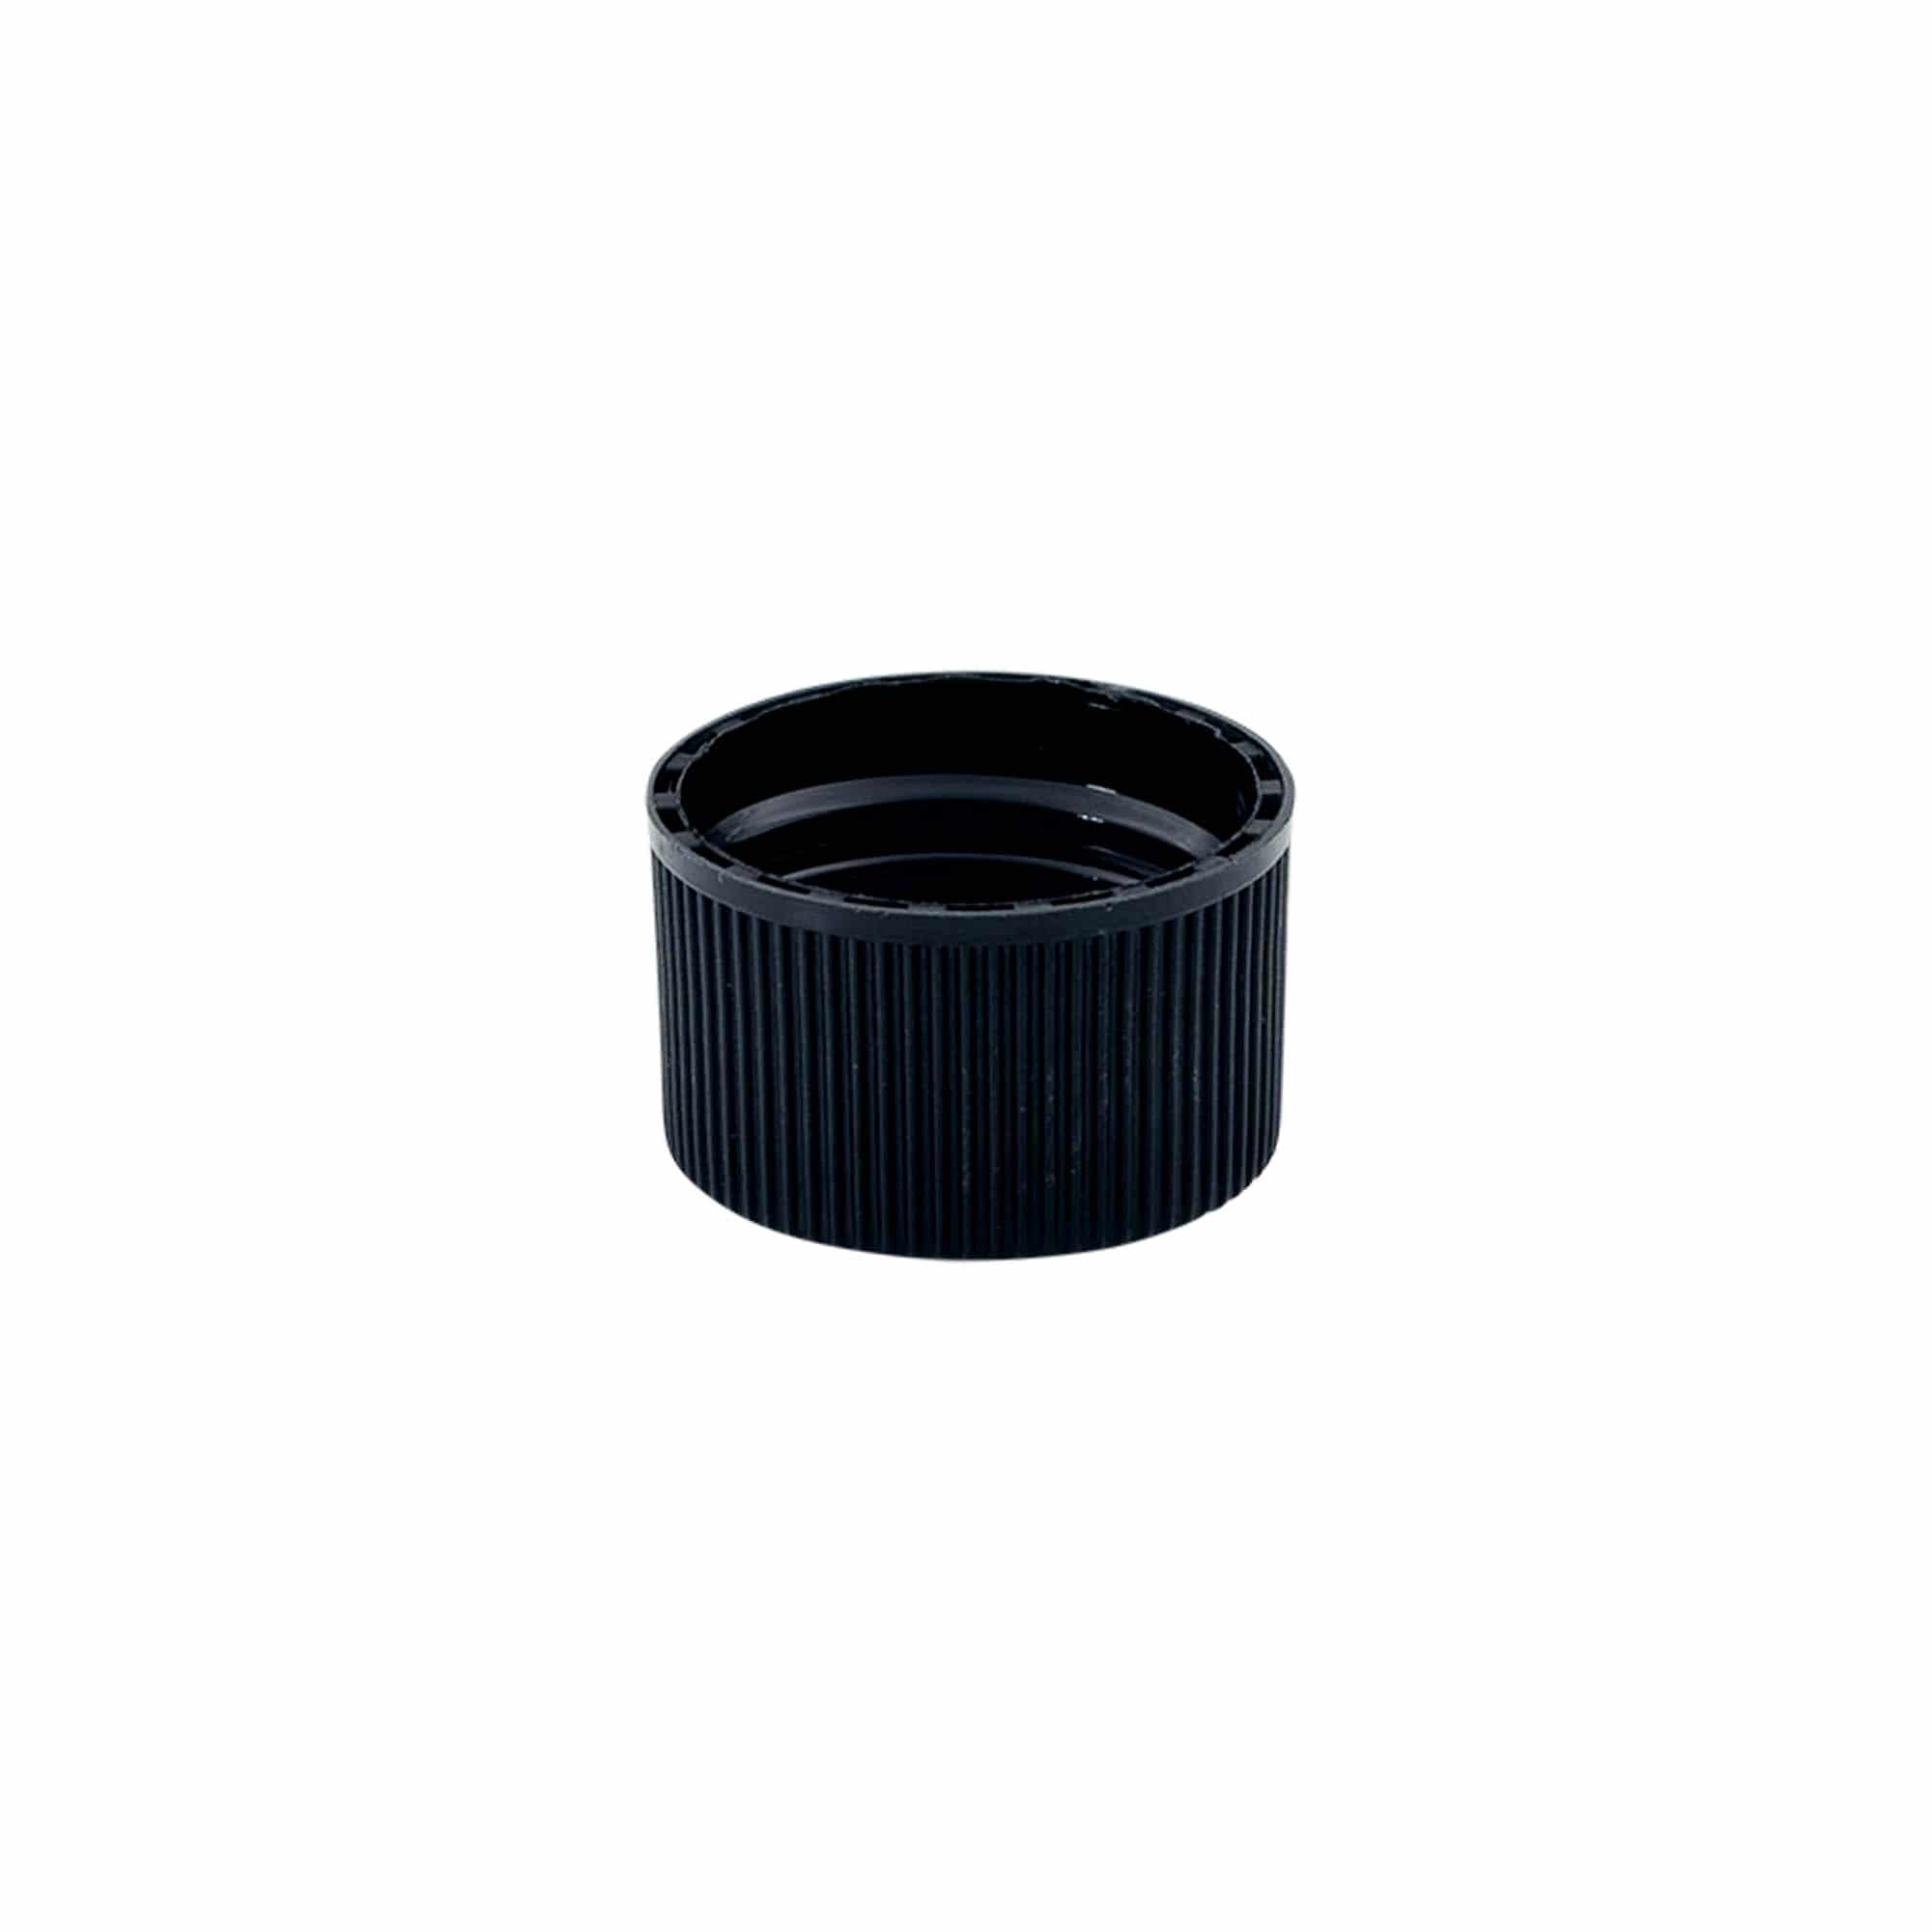 Screw cap with EPE insert, PE plastic, black, for opening: DIN 25